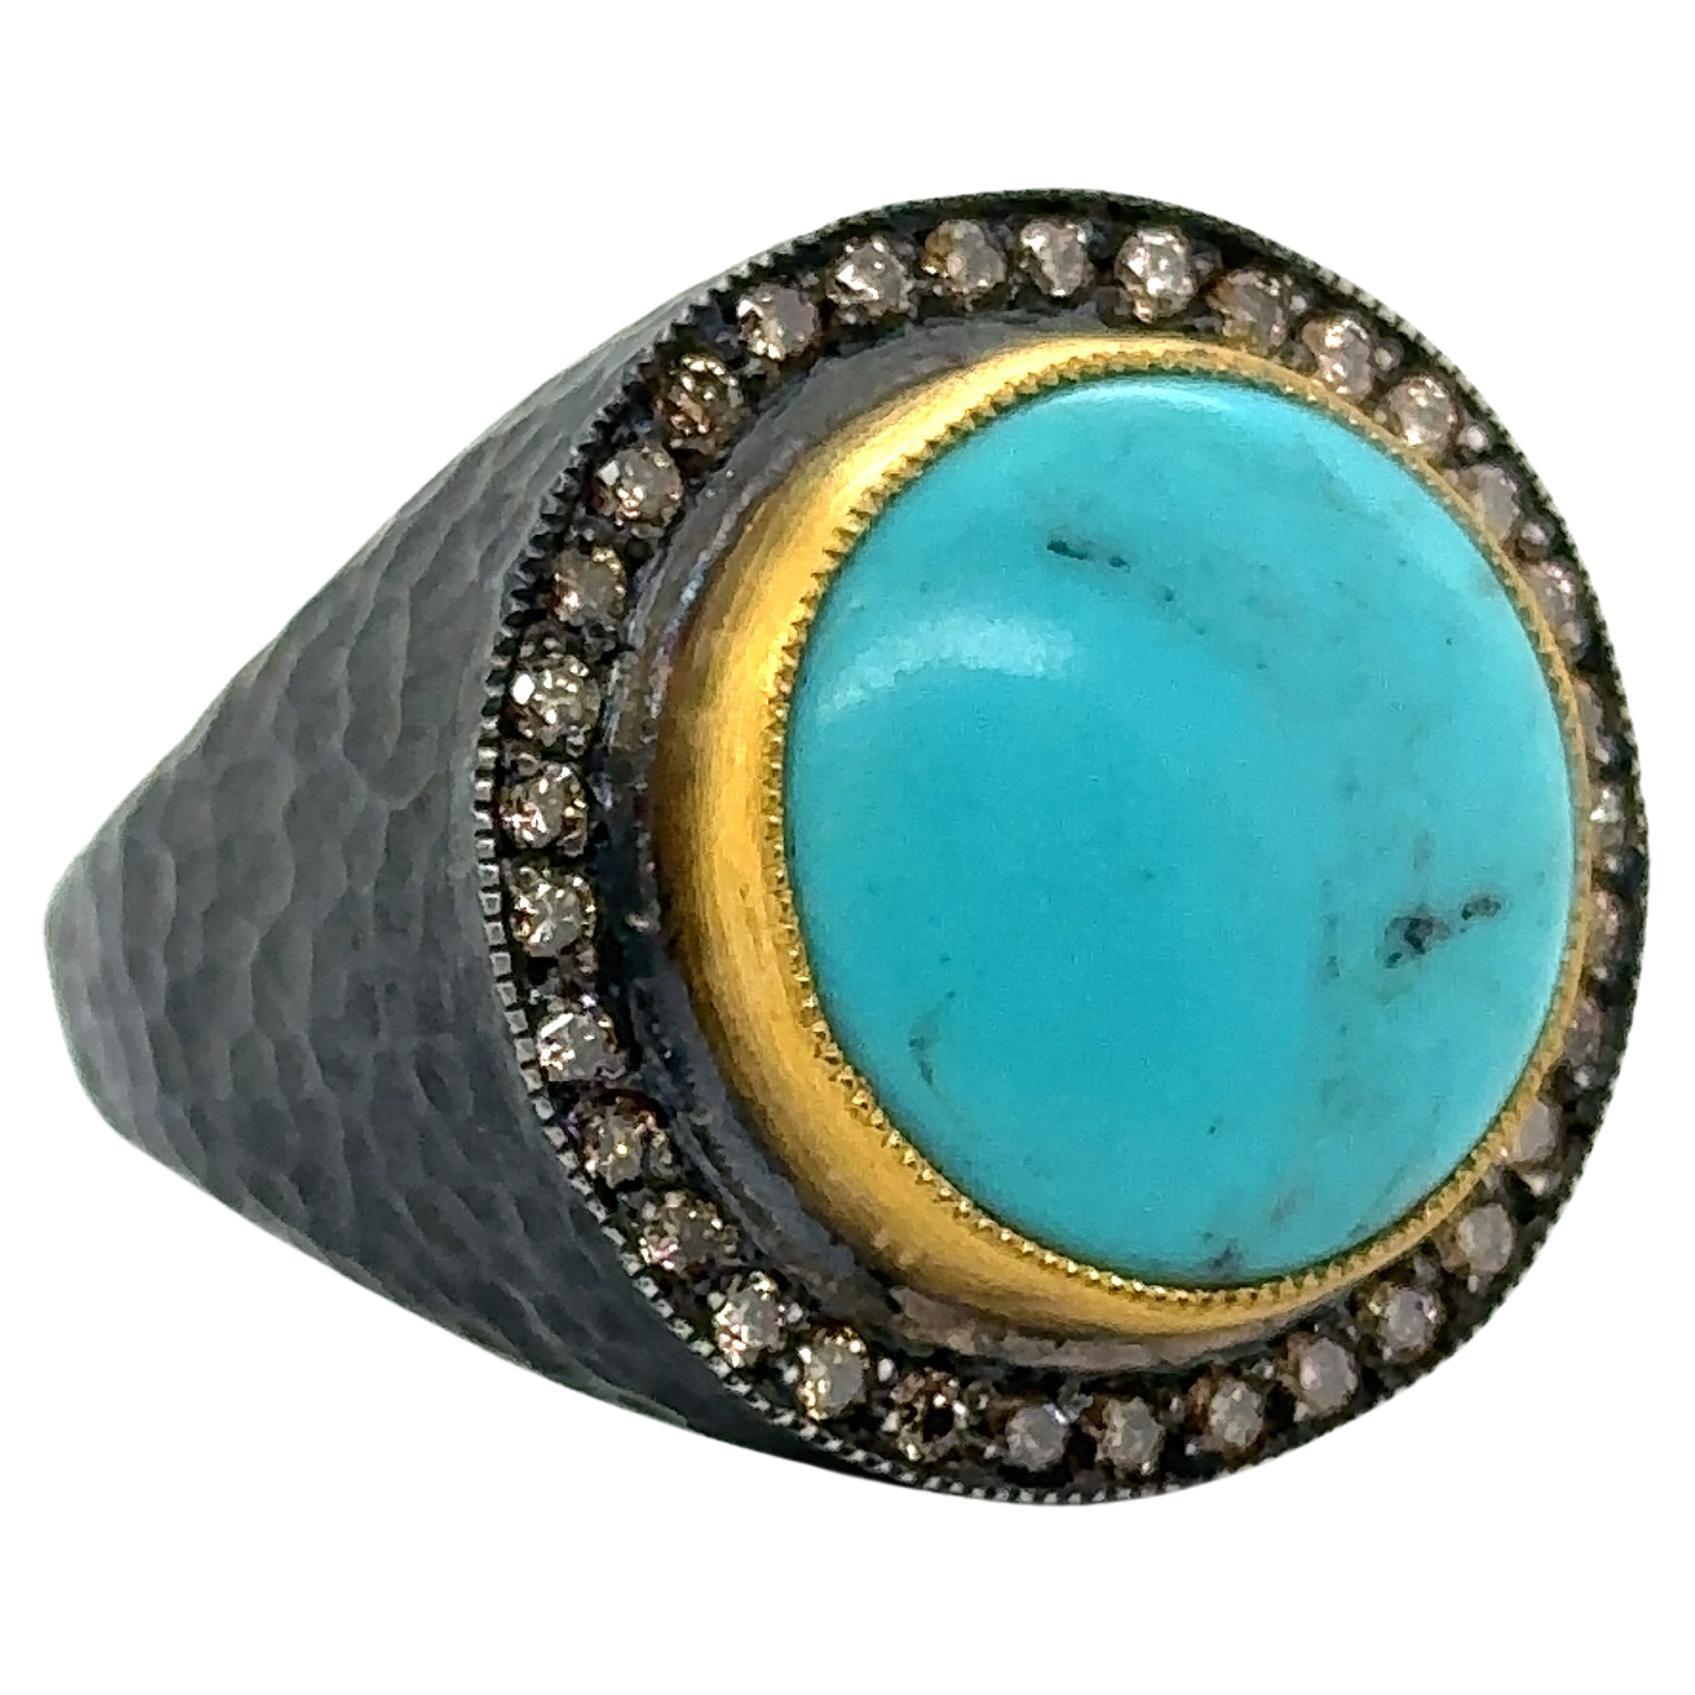 JAS-19-1968 - 24KT GOLD/SS TURQUOISE RING with CHAMPAGNE DIAMONDS